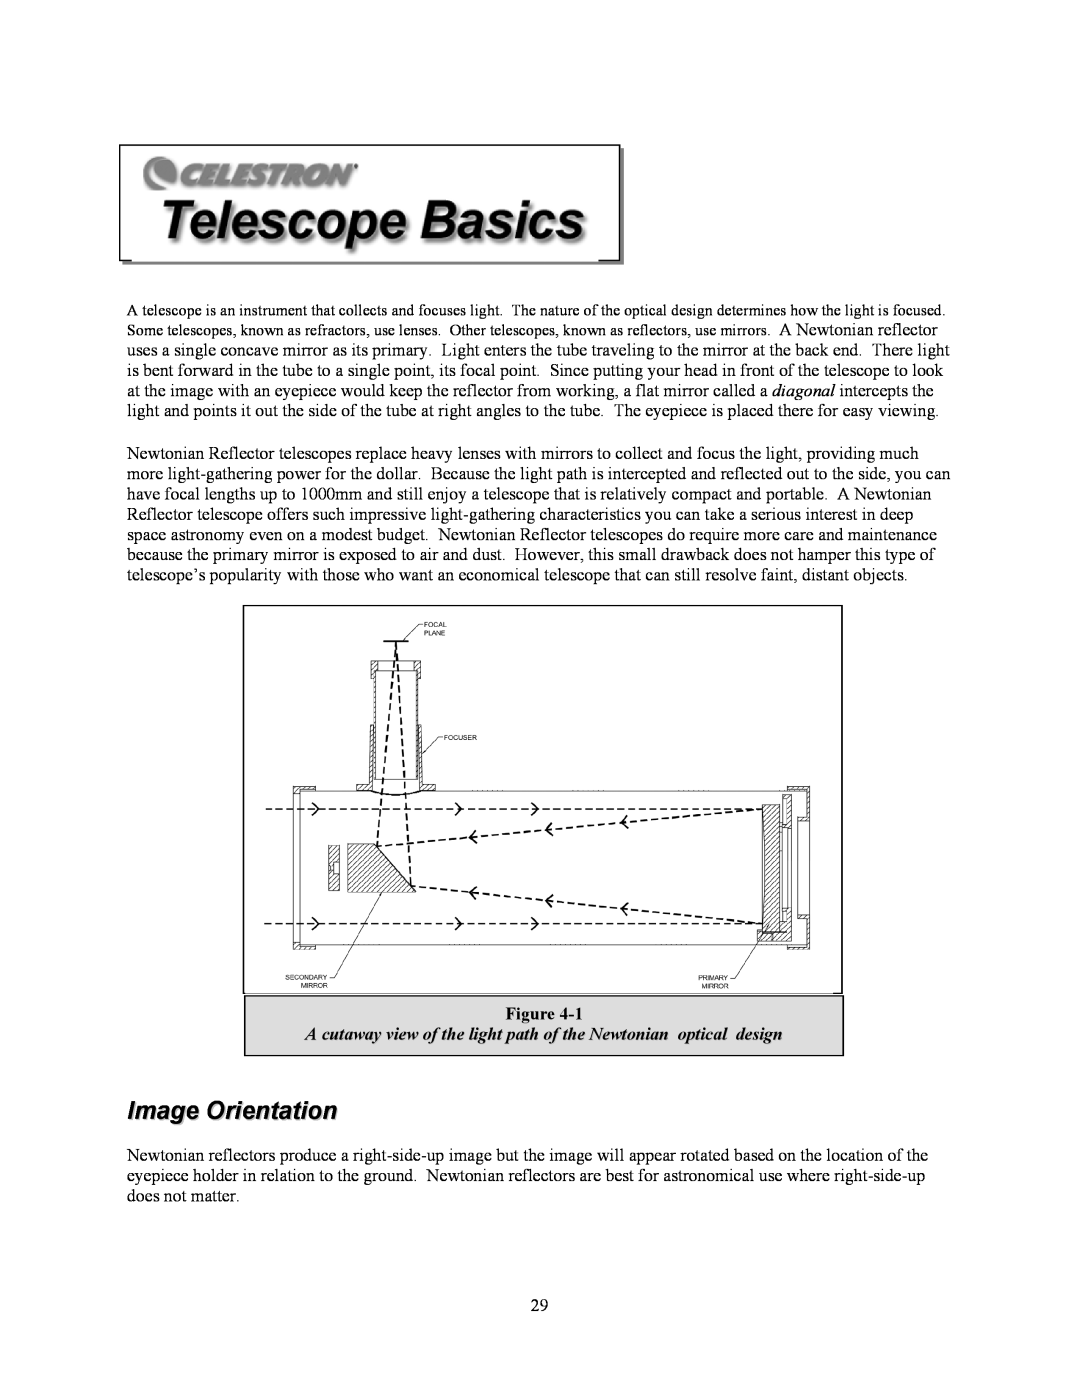 Celestron C10-N, C8-NGT manual Image Orientation, A cutaway view of the light path of the Newtonian optical design 